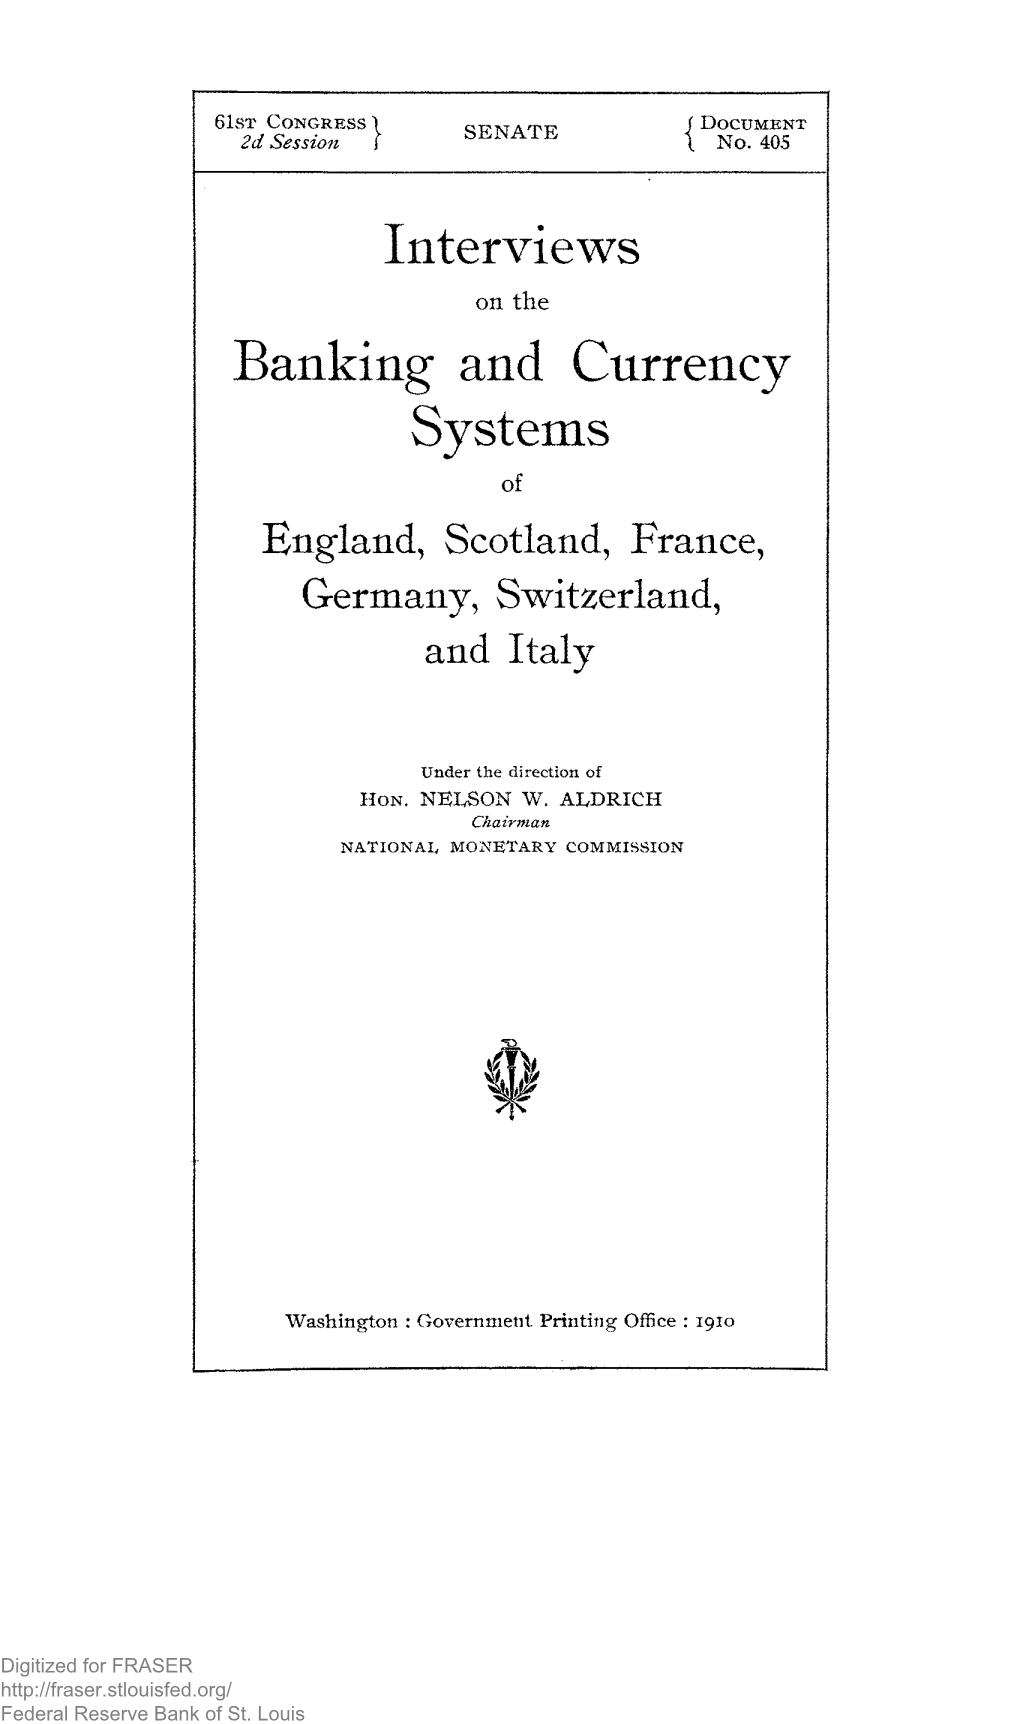 405. Interviews on the Banking and Currency Systems of England